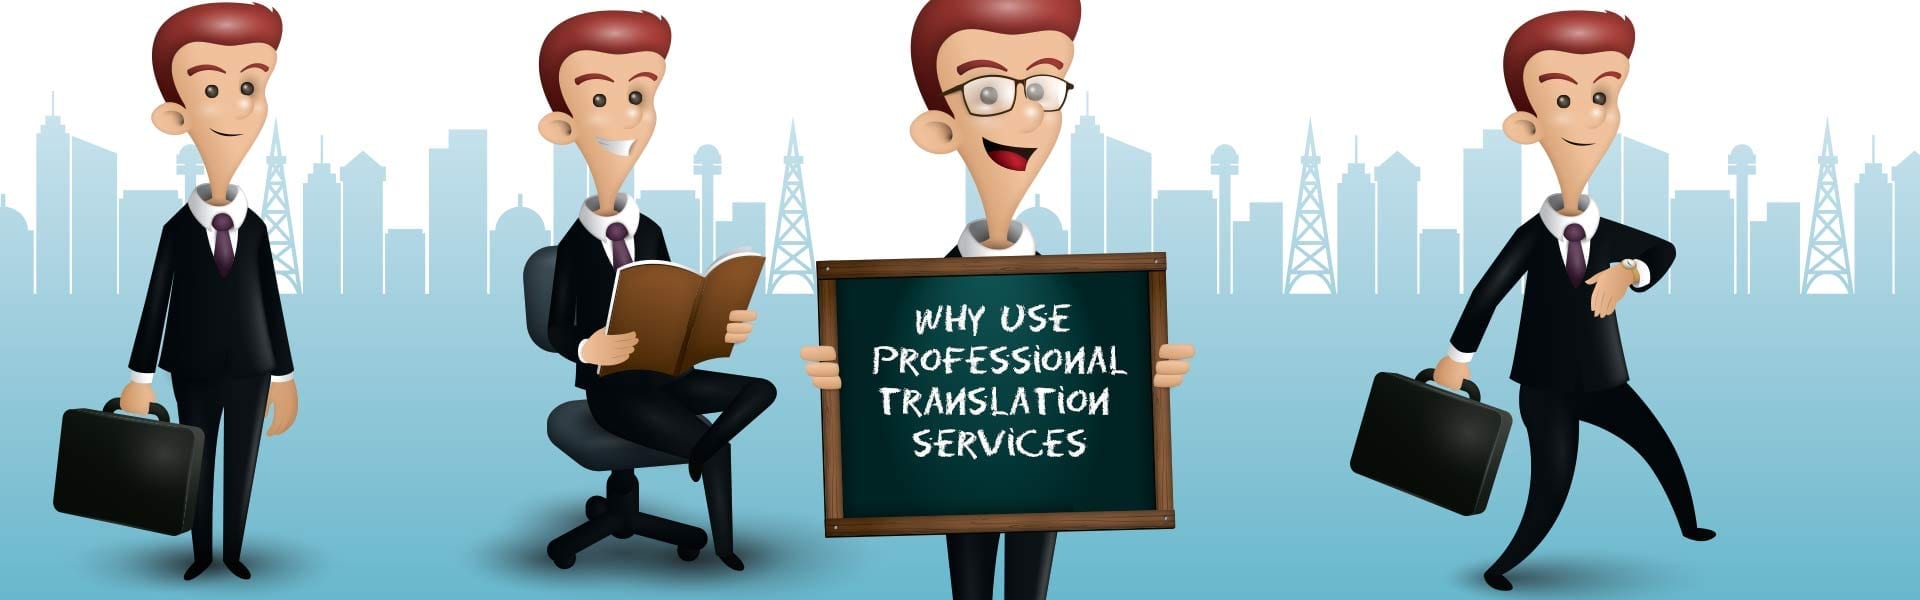 why-use-professional-translation-services